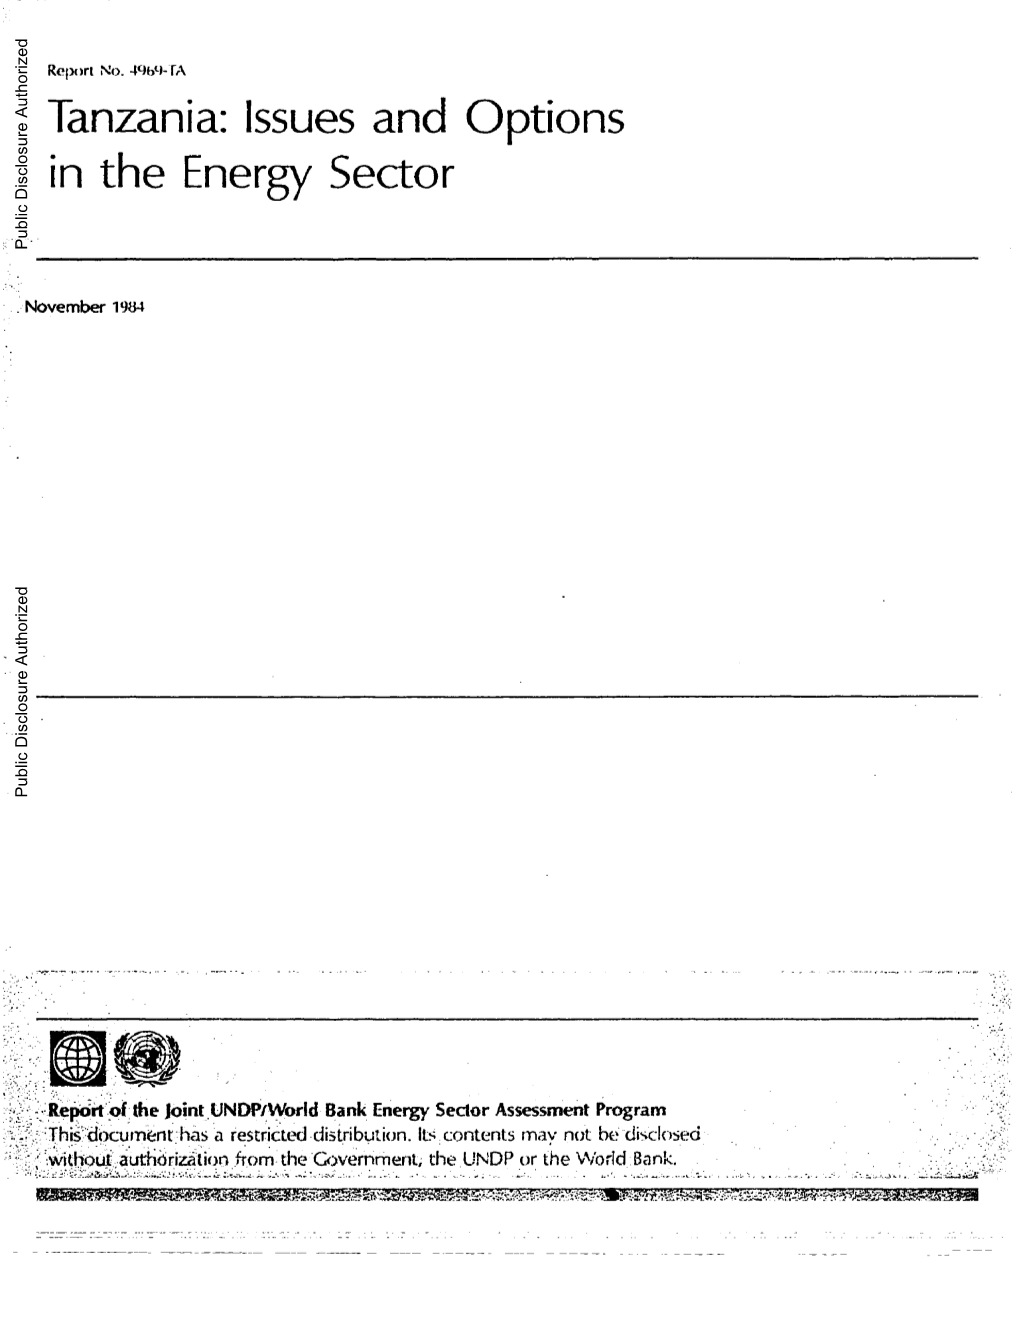 Tanzania: Issues and Options in the Energy Sector Public Disclosure Authorized